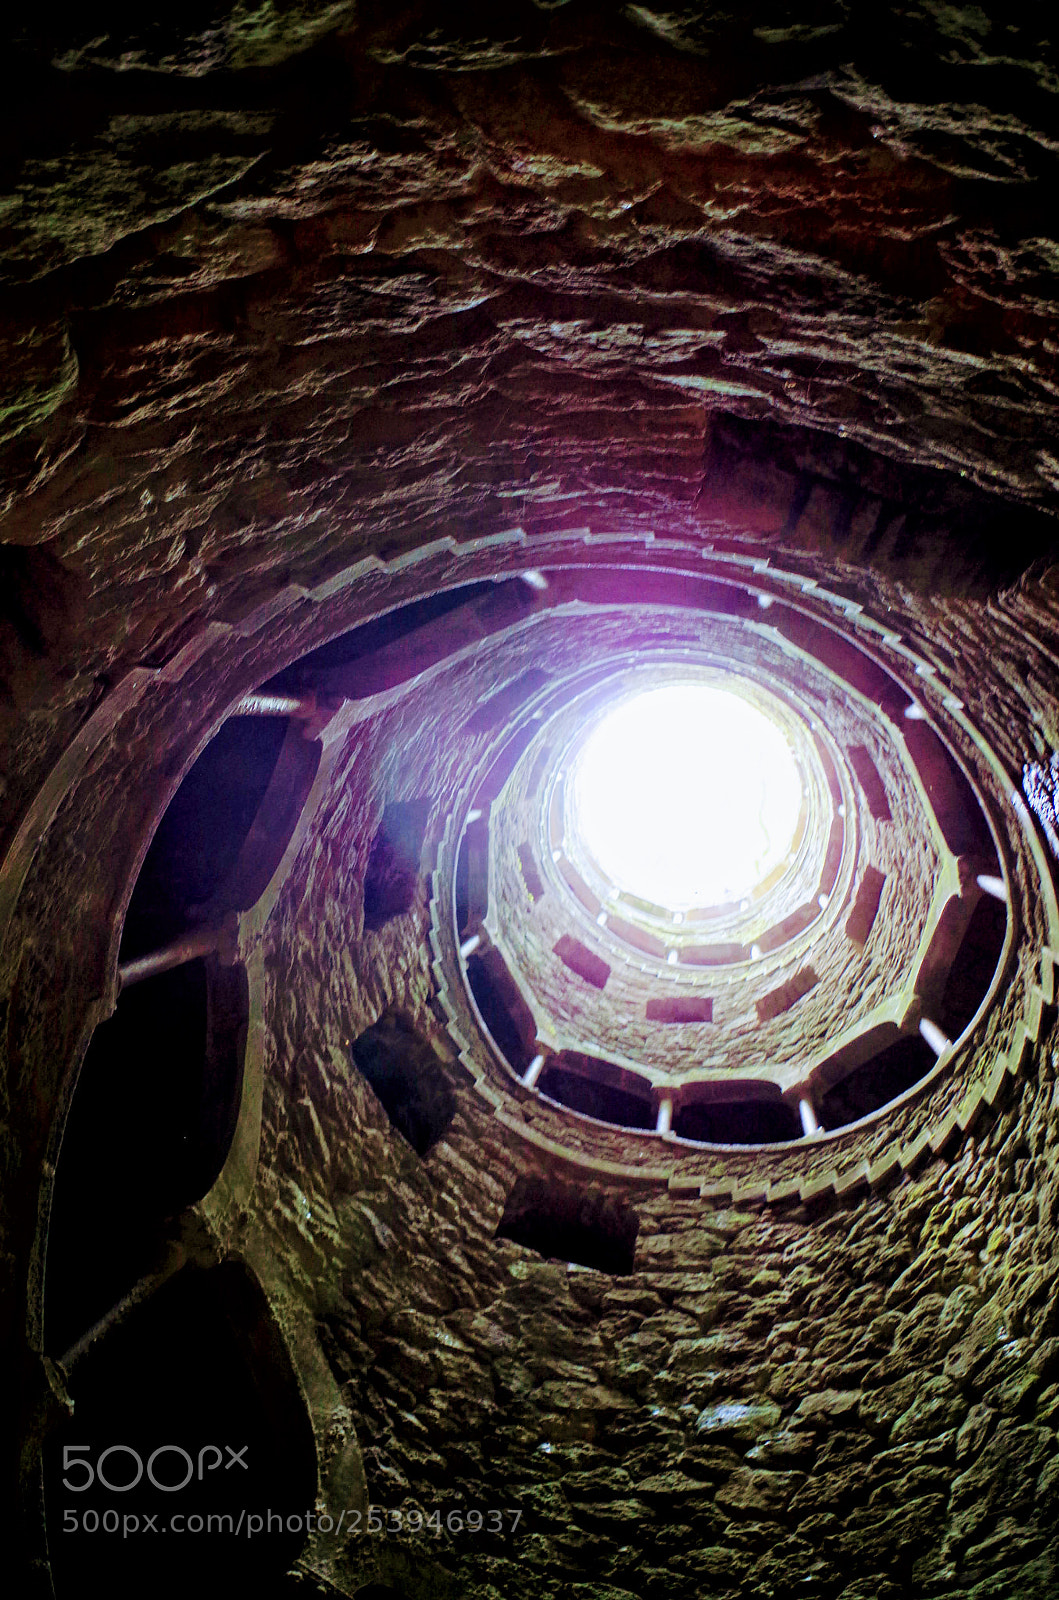 Pentax K-50 sample photo. Inverted tower photography